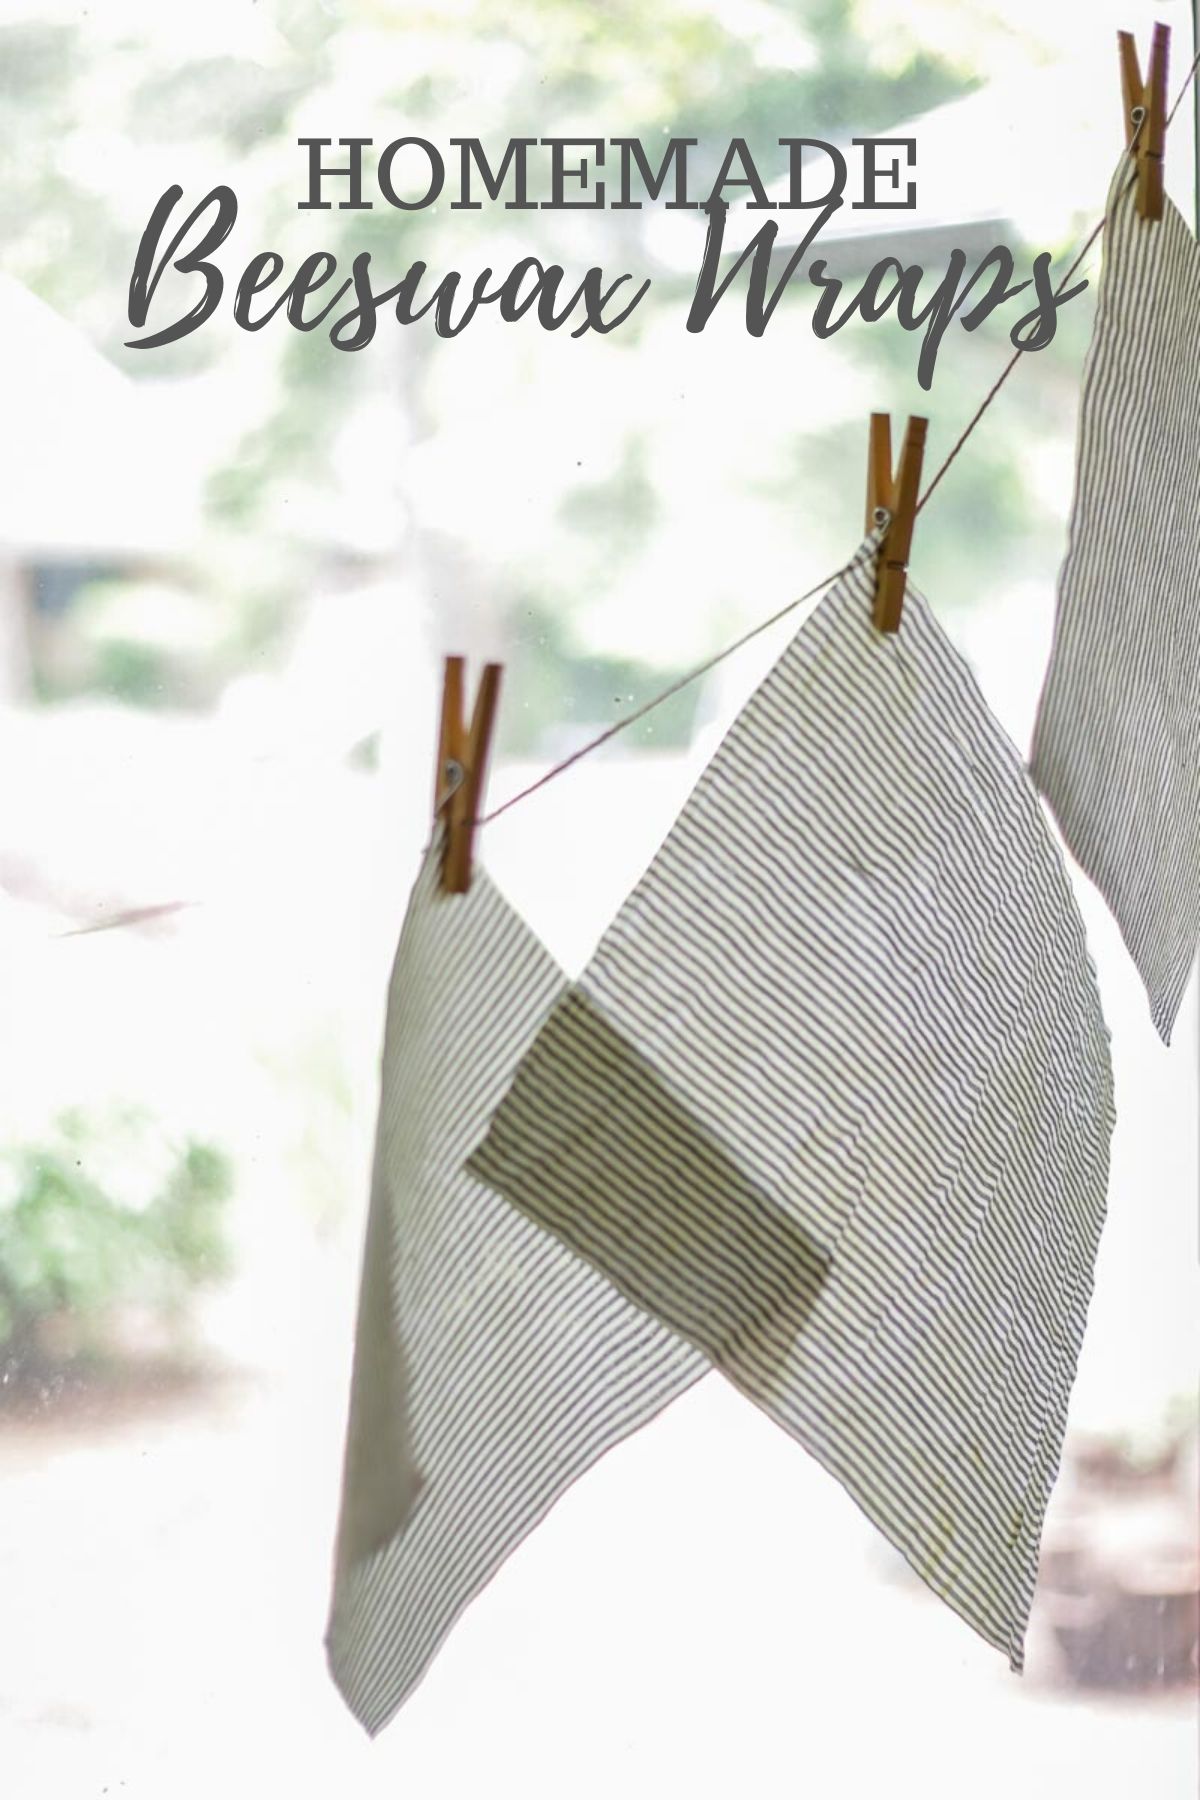 How To Make Beeswax Wraps